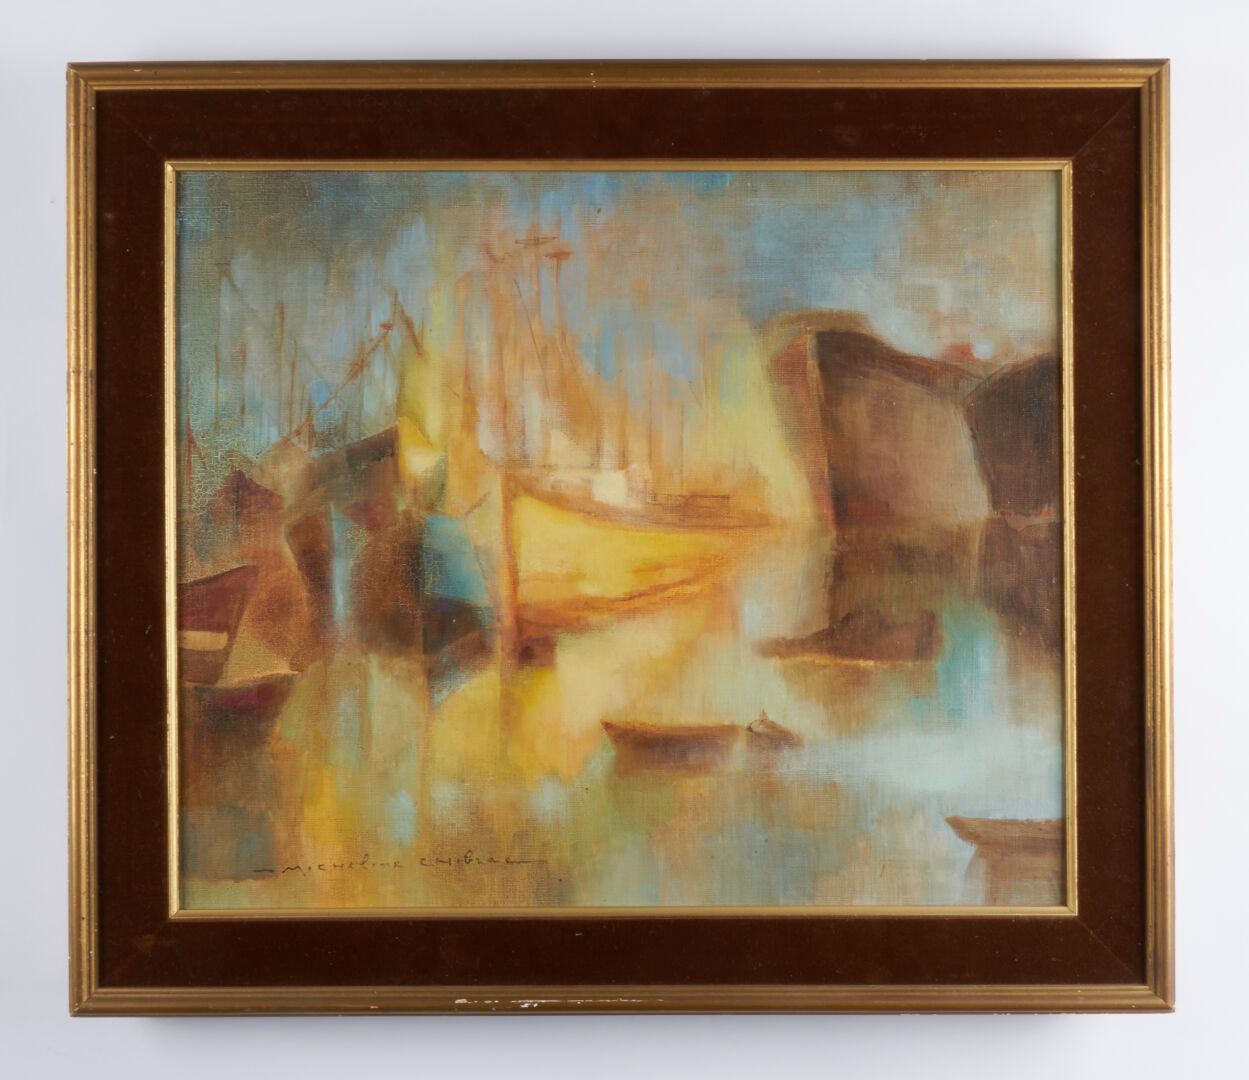 Null CHIBRAC Micheline (born in 1912)

"Oil on canvas signed down left - 46x55